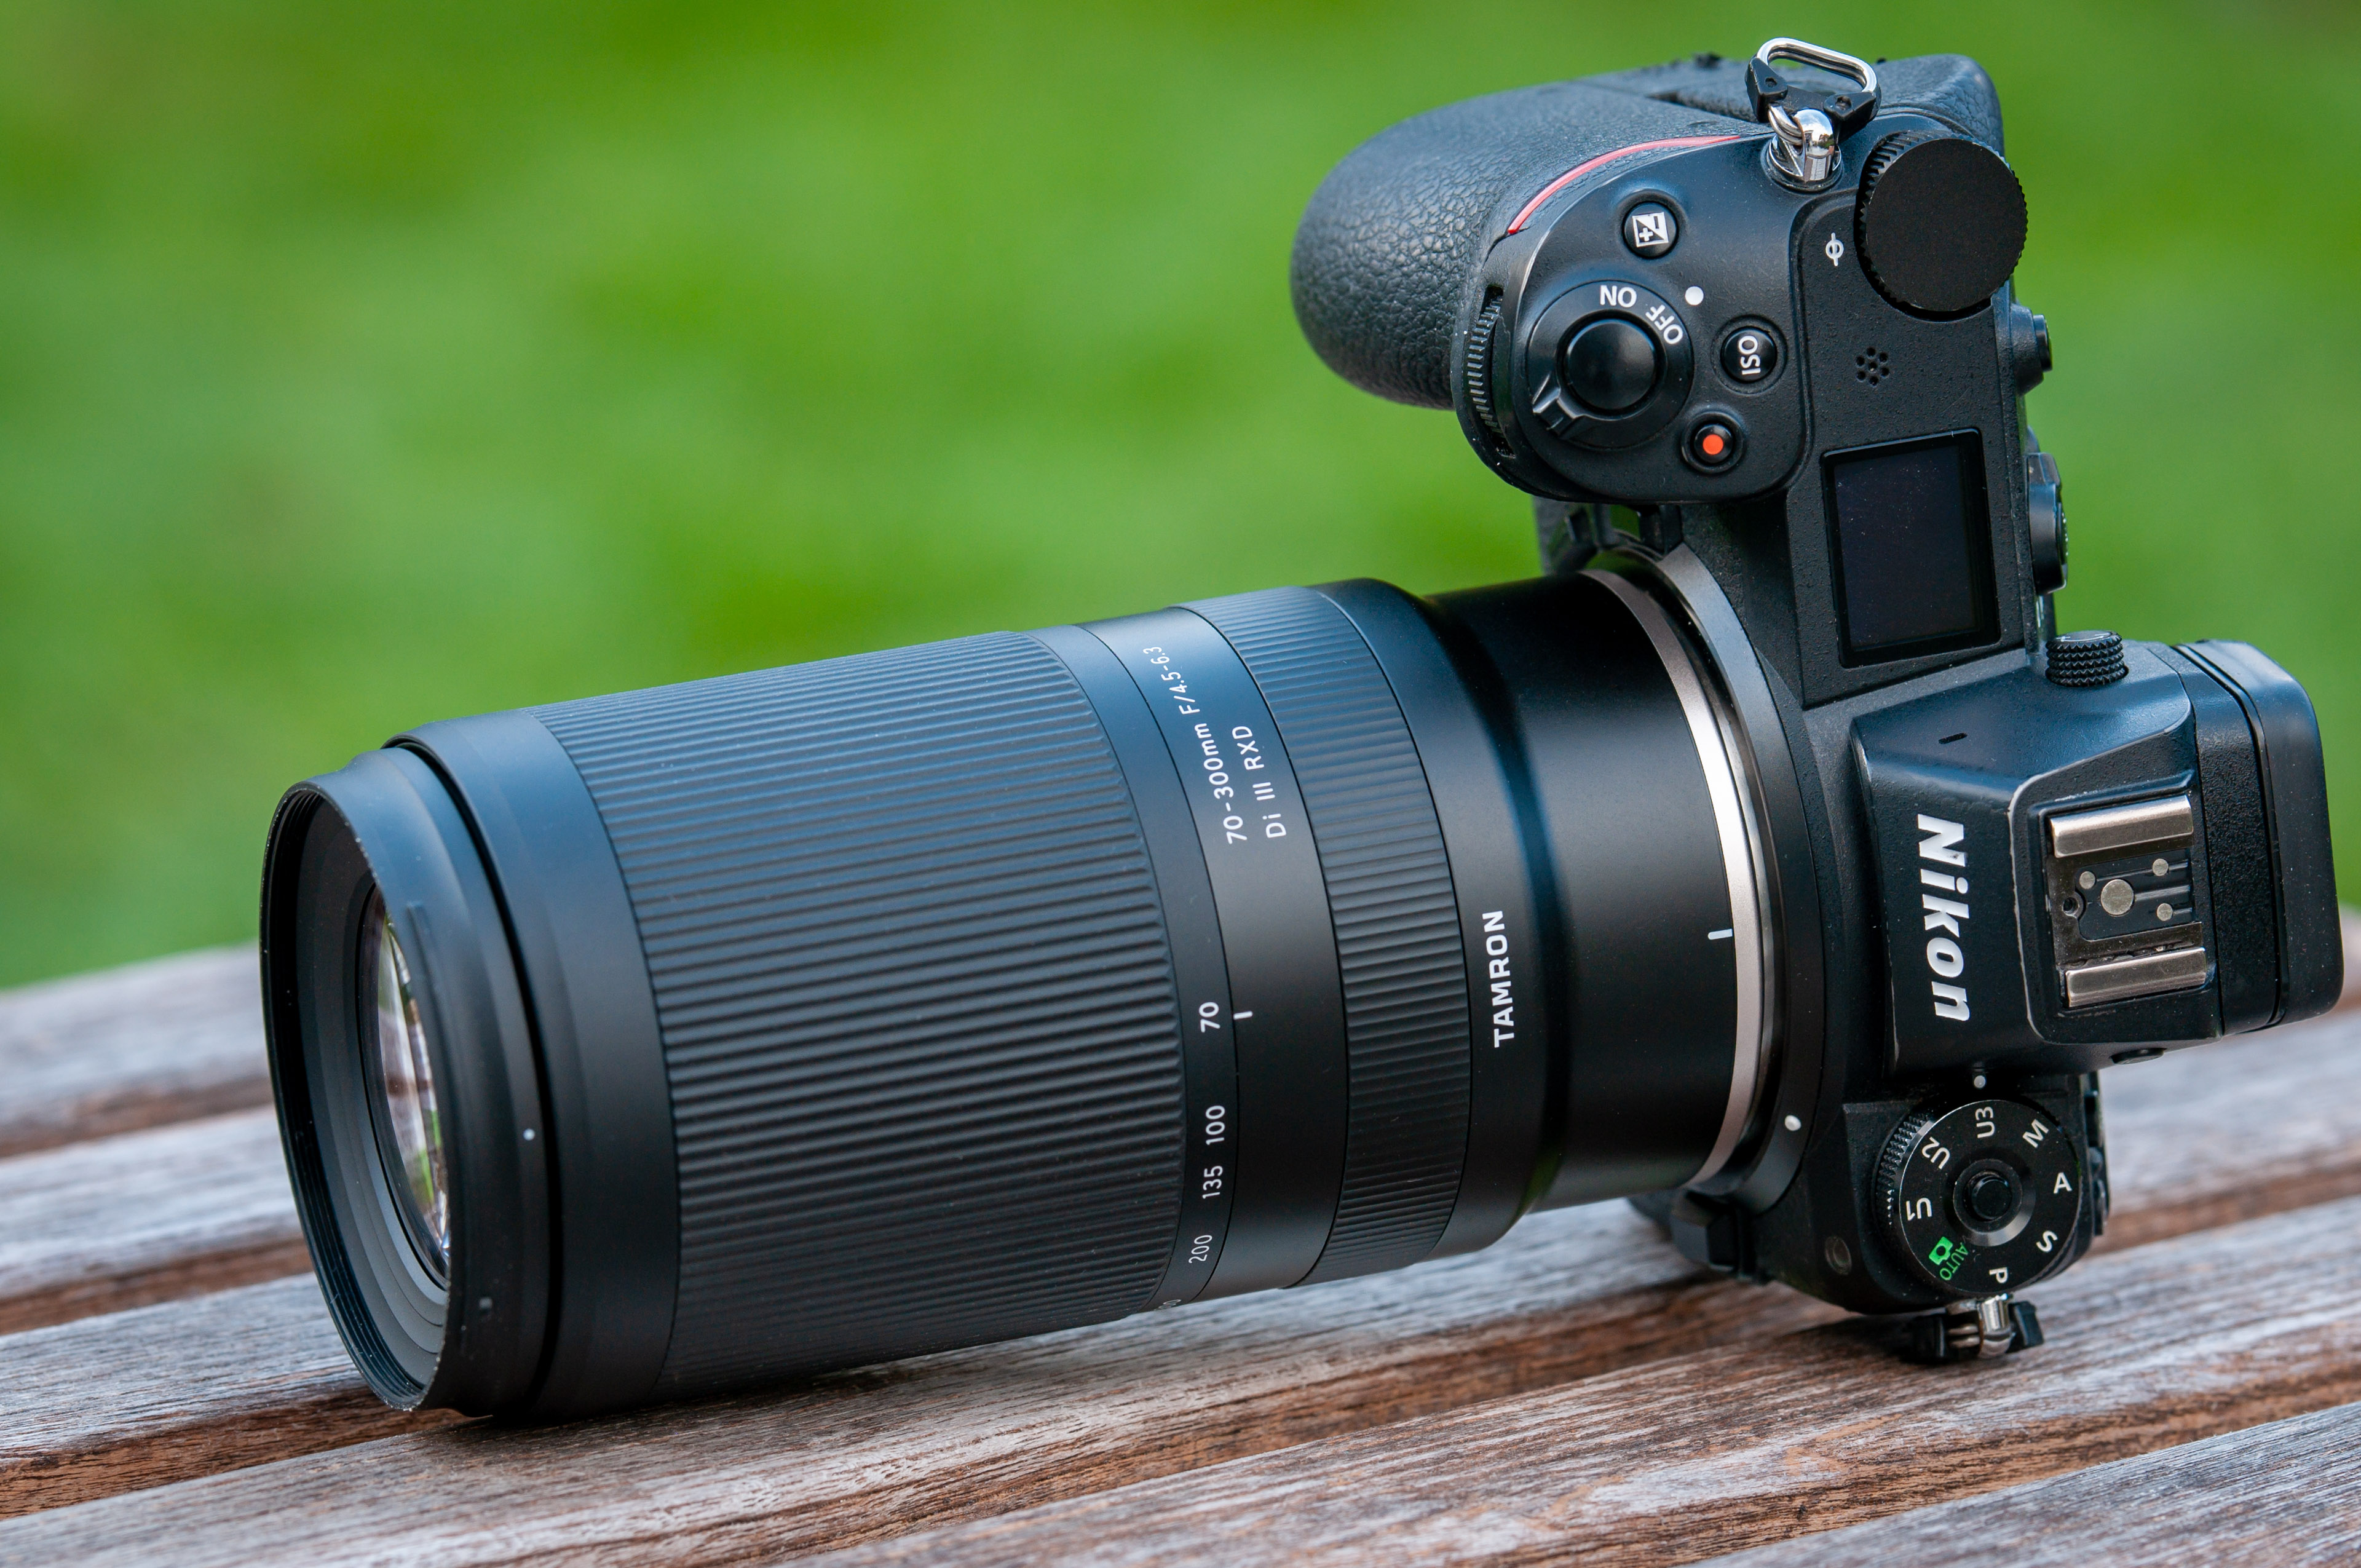 Tamron 70-300mm F4.5-6.3 Di III RXD Review